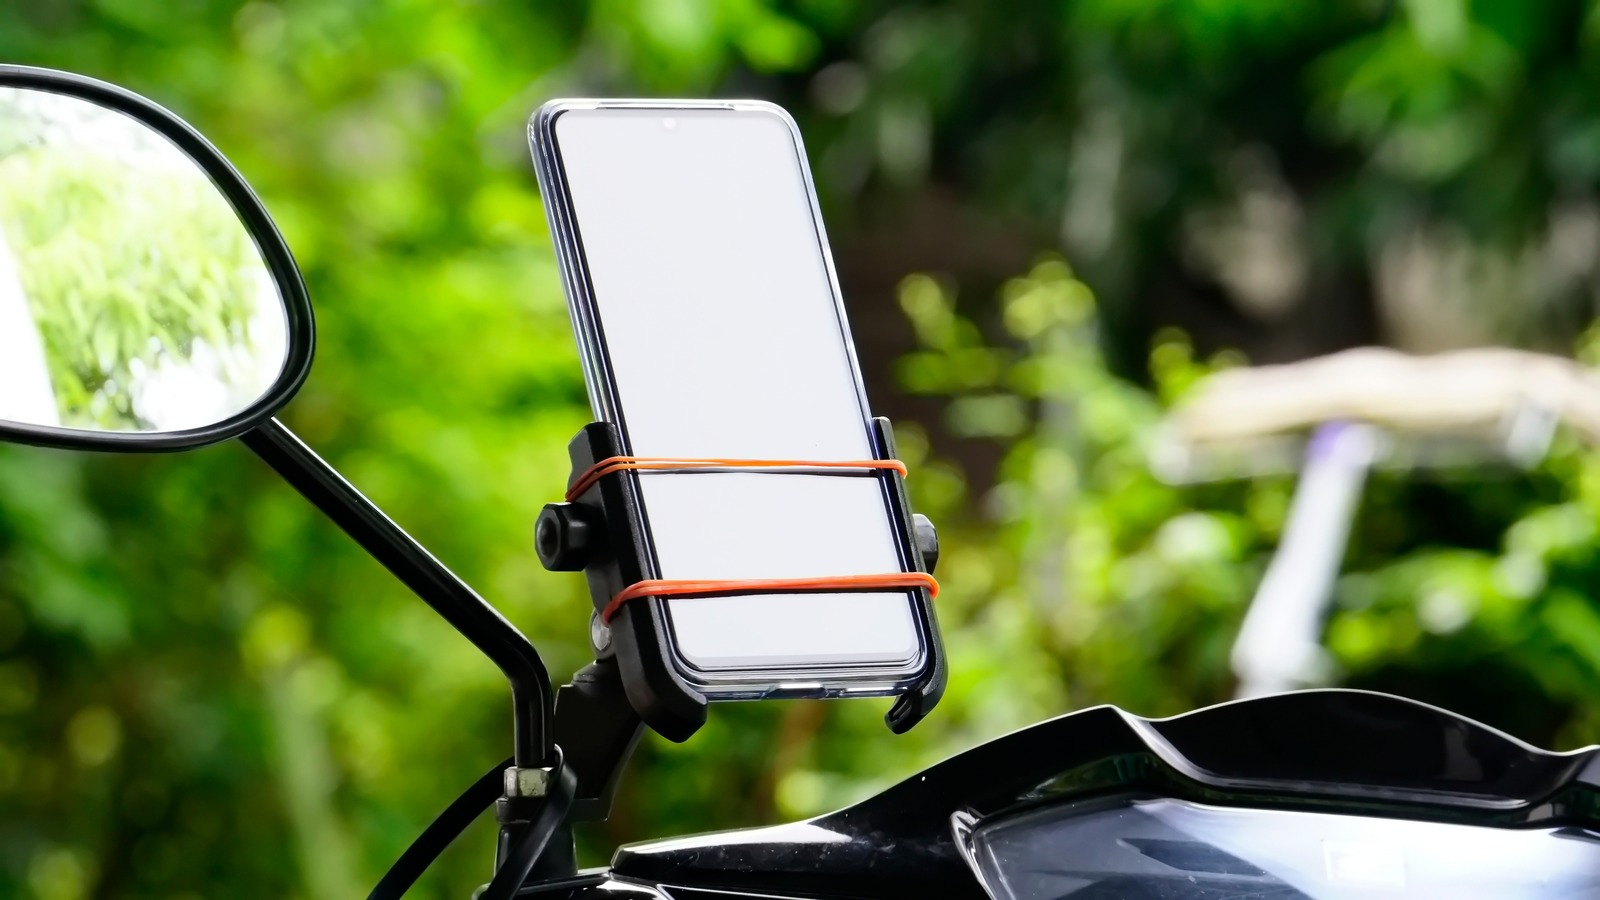 The Top 5 Best Motorcycle Phone Mounts For Your Ride